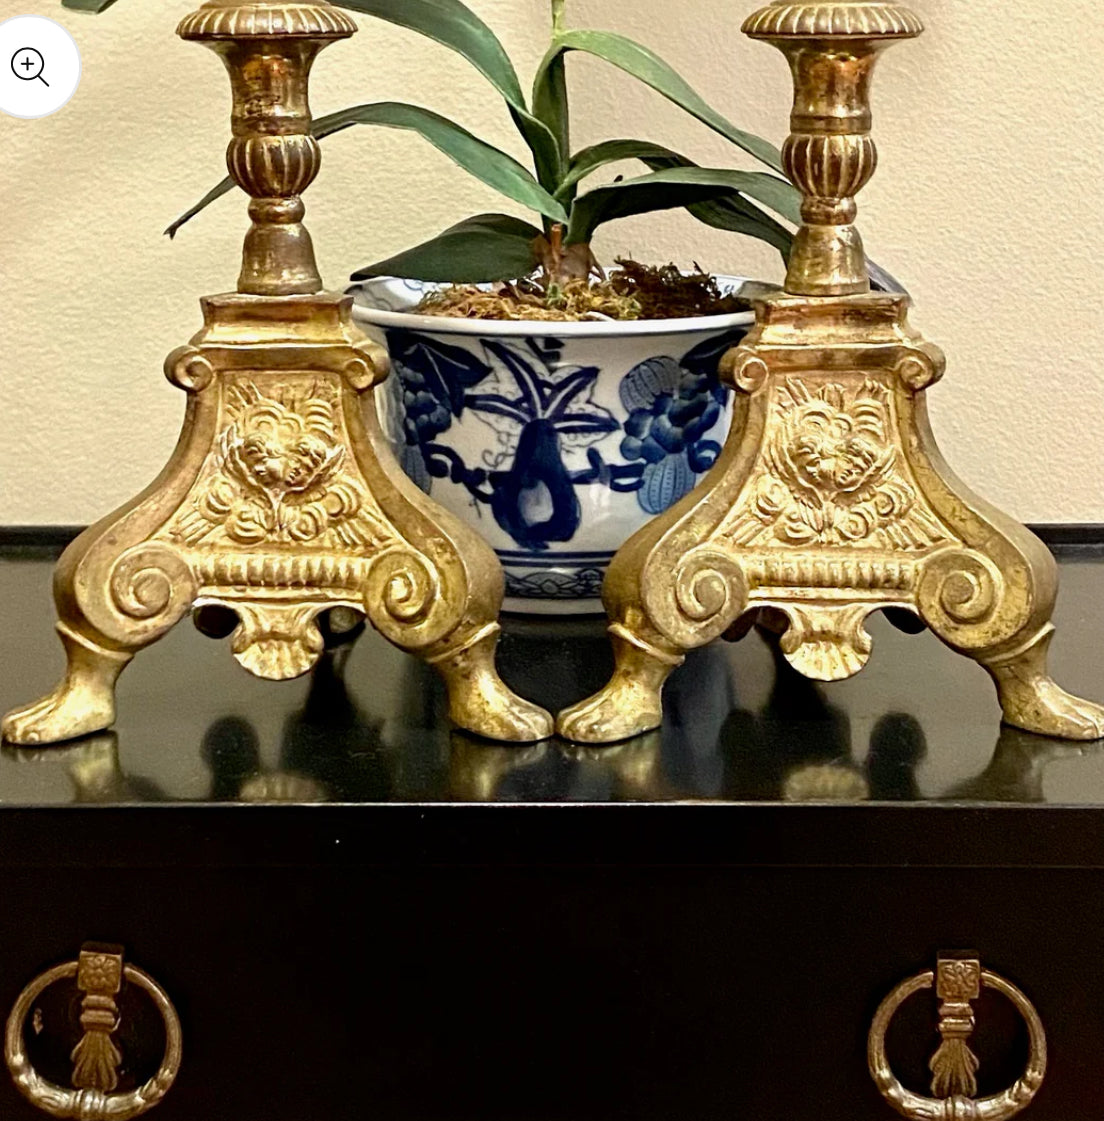 Spectacular pair of Brass claw leg chippendale candle holders